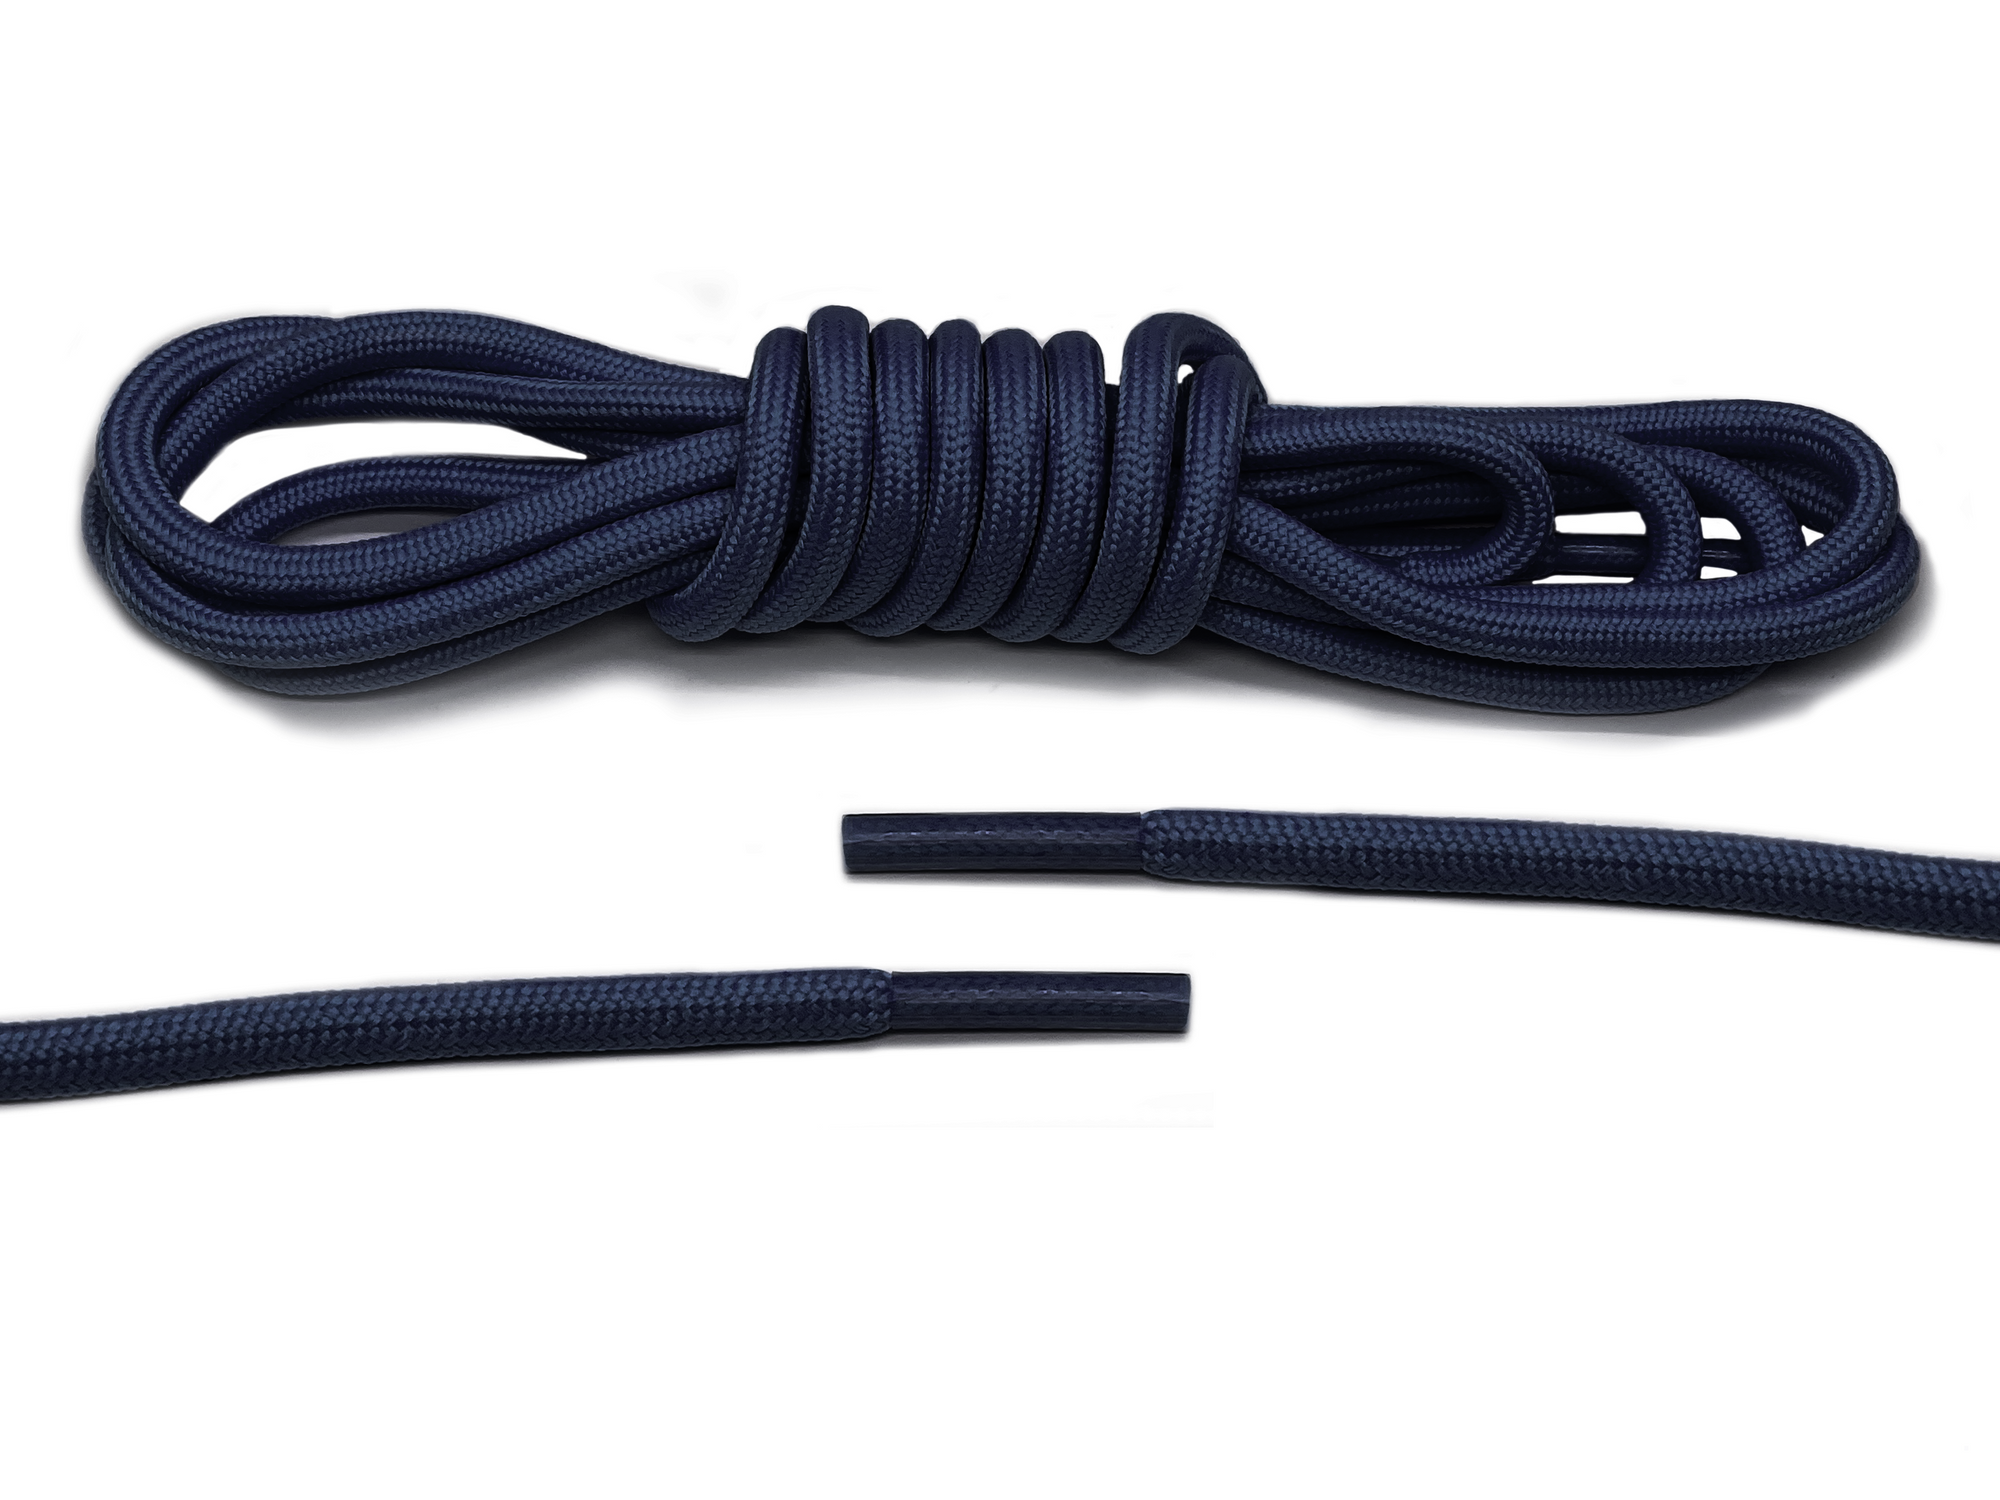 The Navy Blue Round Shoe Lace - Belaced